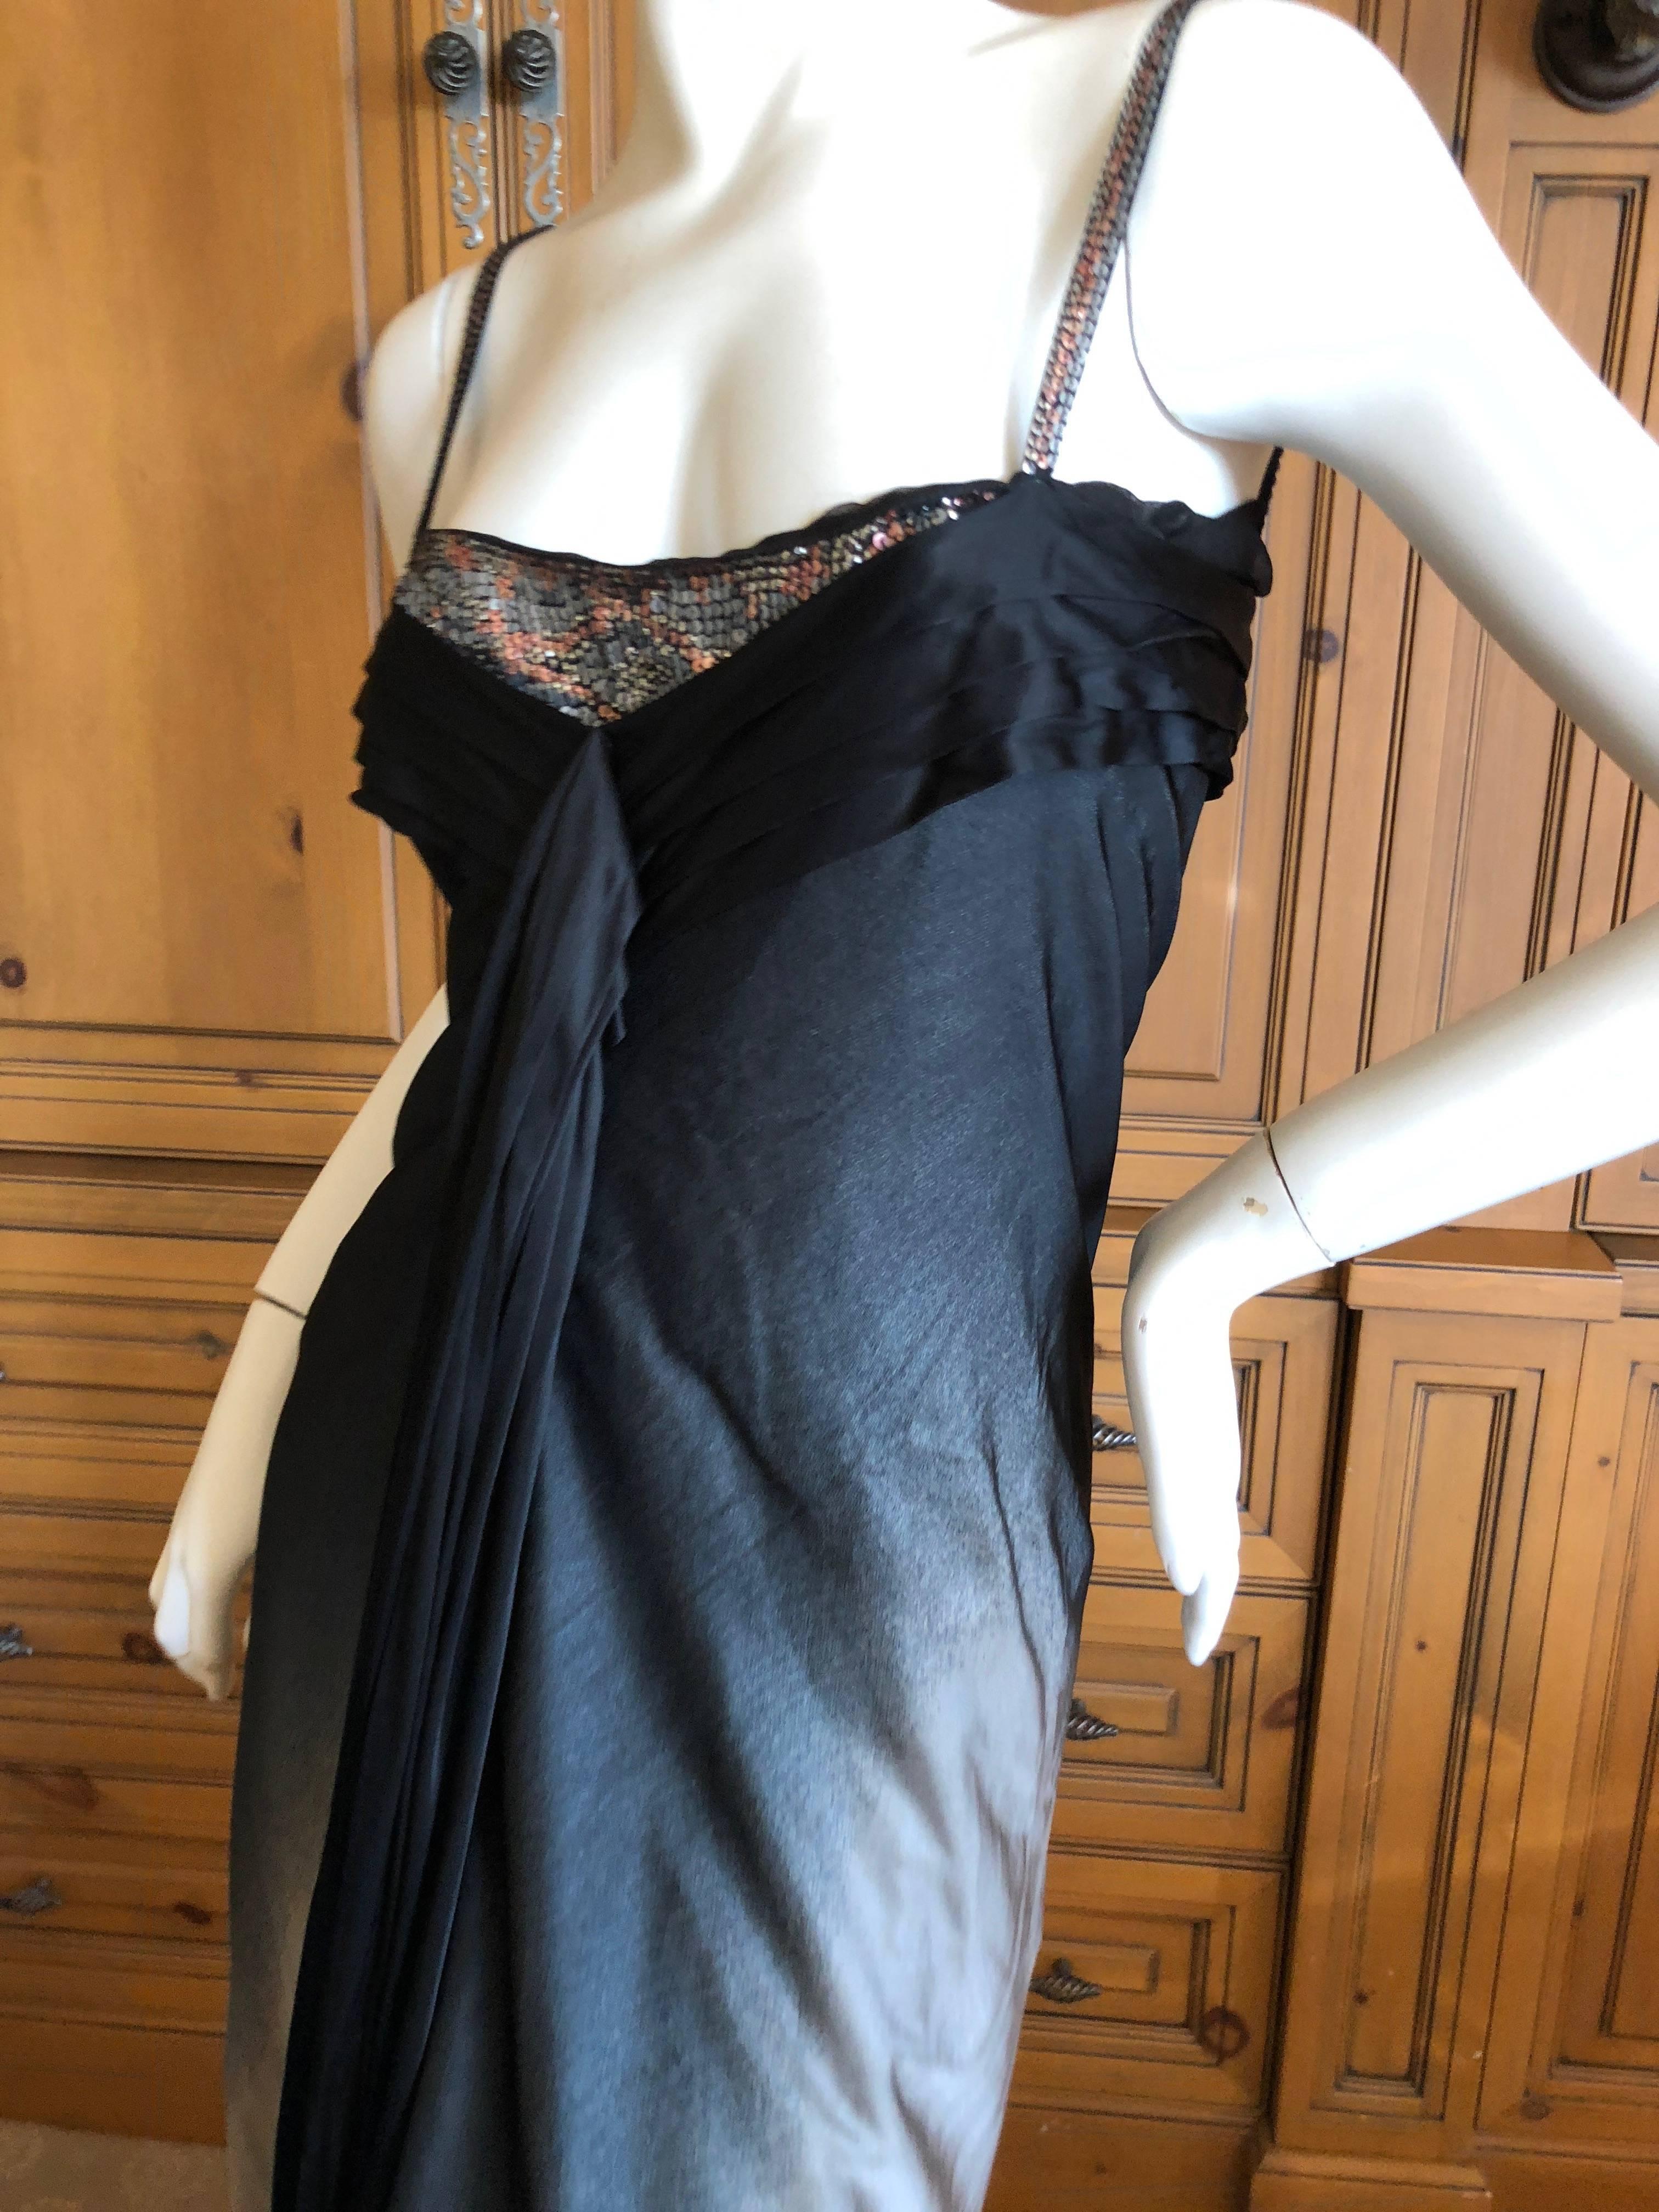 Christian Lacroix Silver and Black Vintage Silk Evening Dress with Sequin Detail For Sale 2